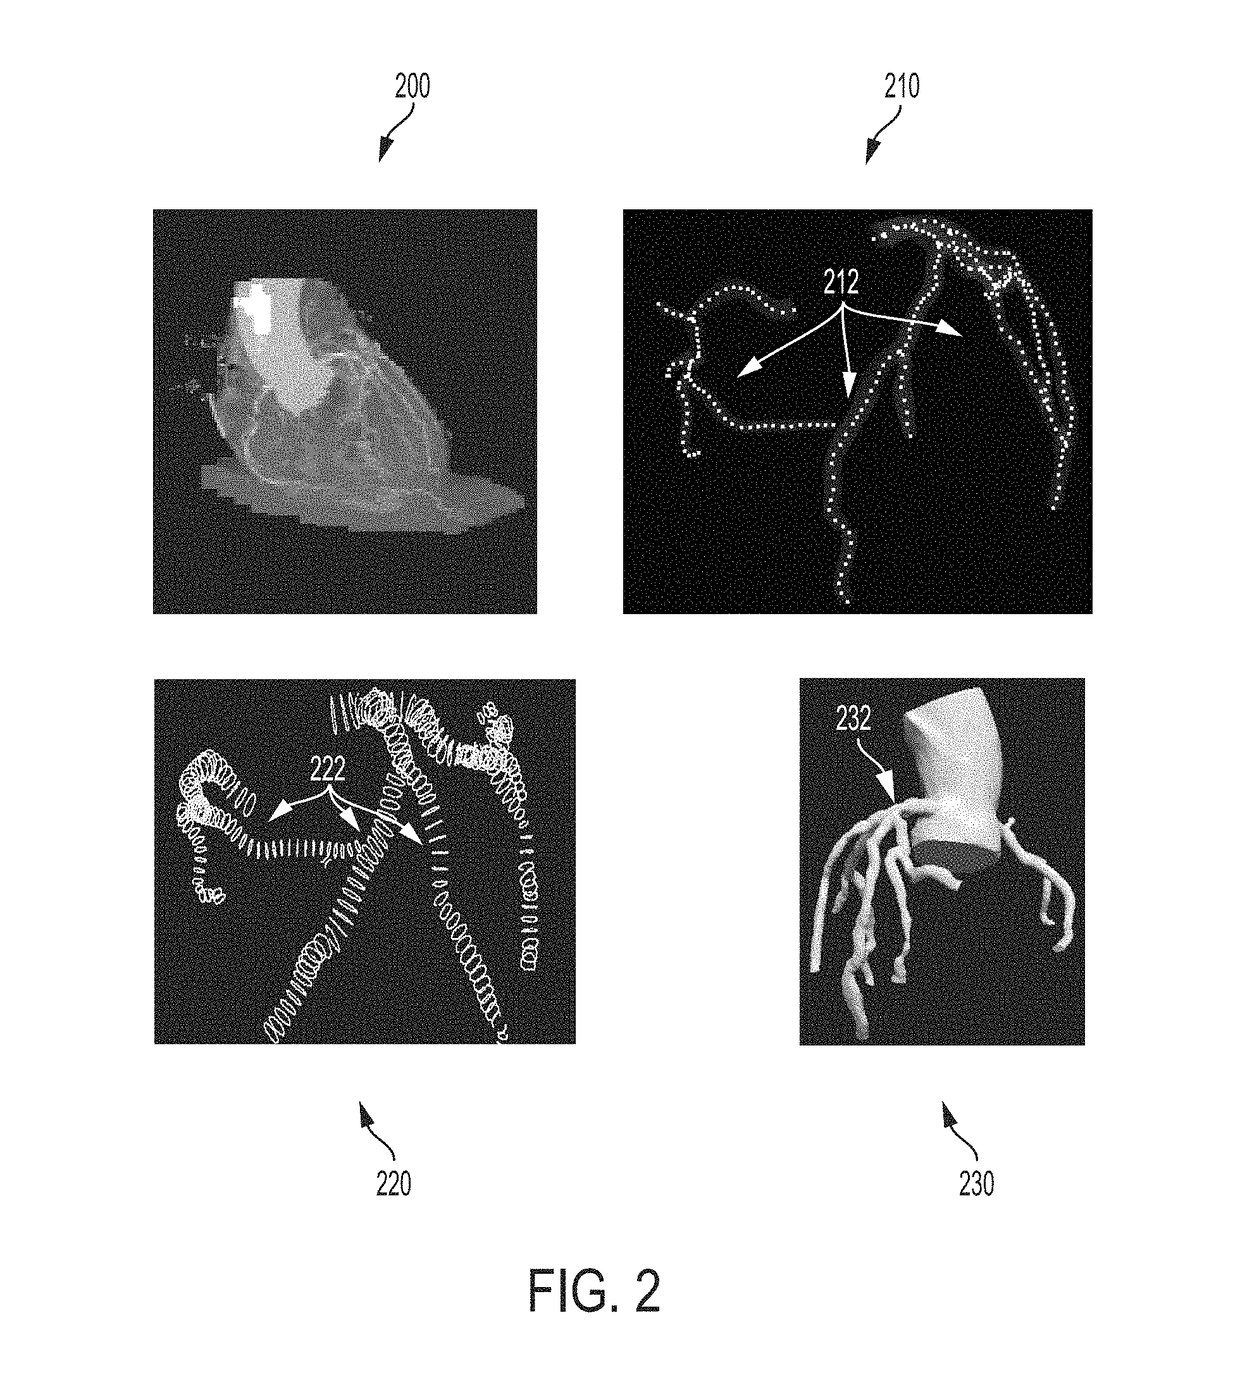 Method and system for automated therapy planning for arterial stenosis